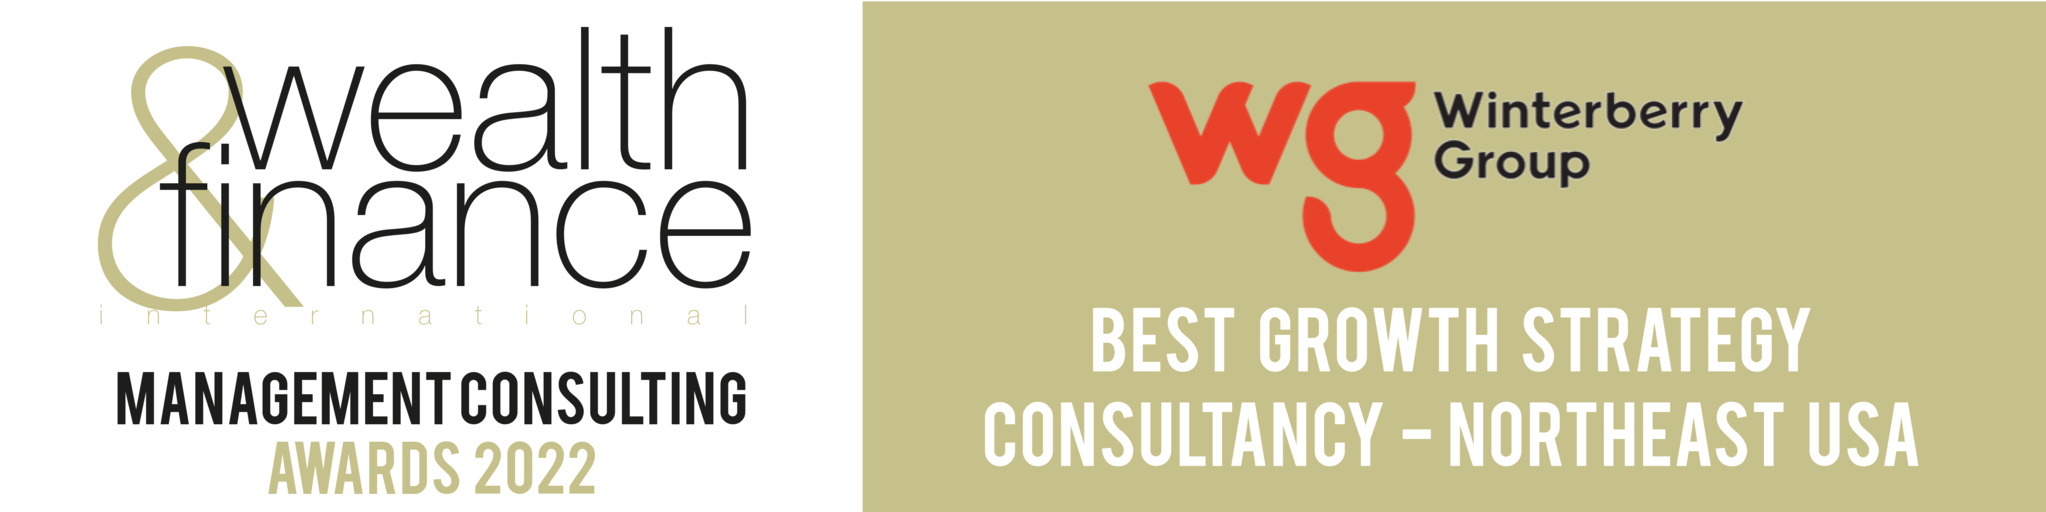 Winterberry Group Named ‘Best Growth Strategy Consultancy - Northeast USA’